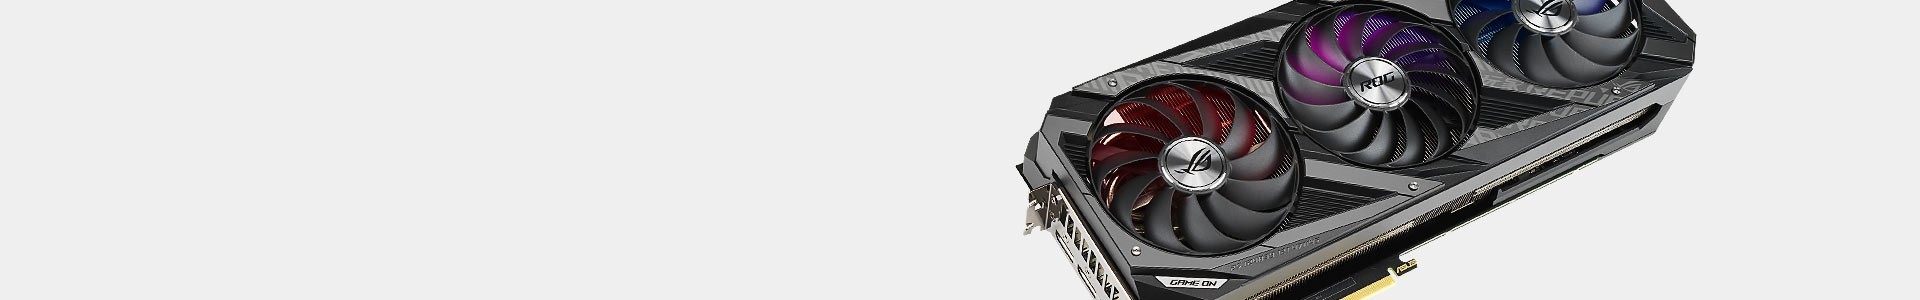 Graphics Cards for Video Editing and Color Grading - Avacab